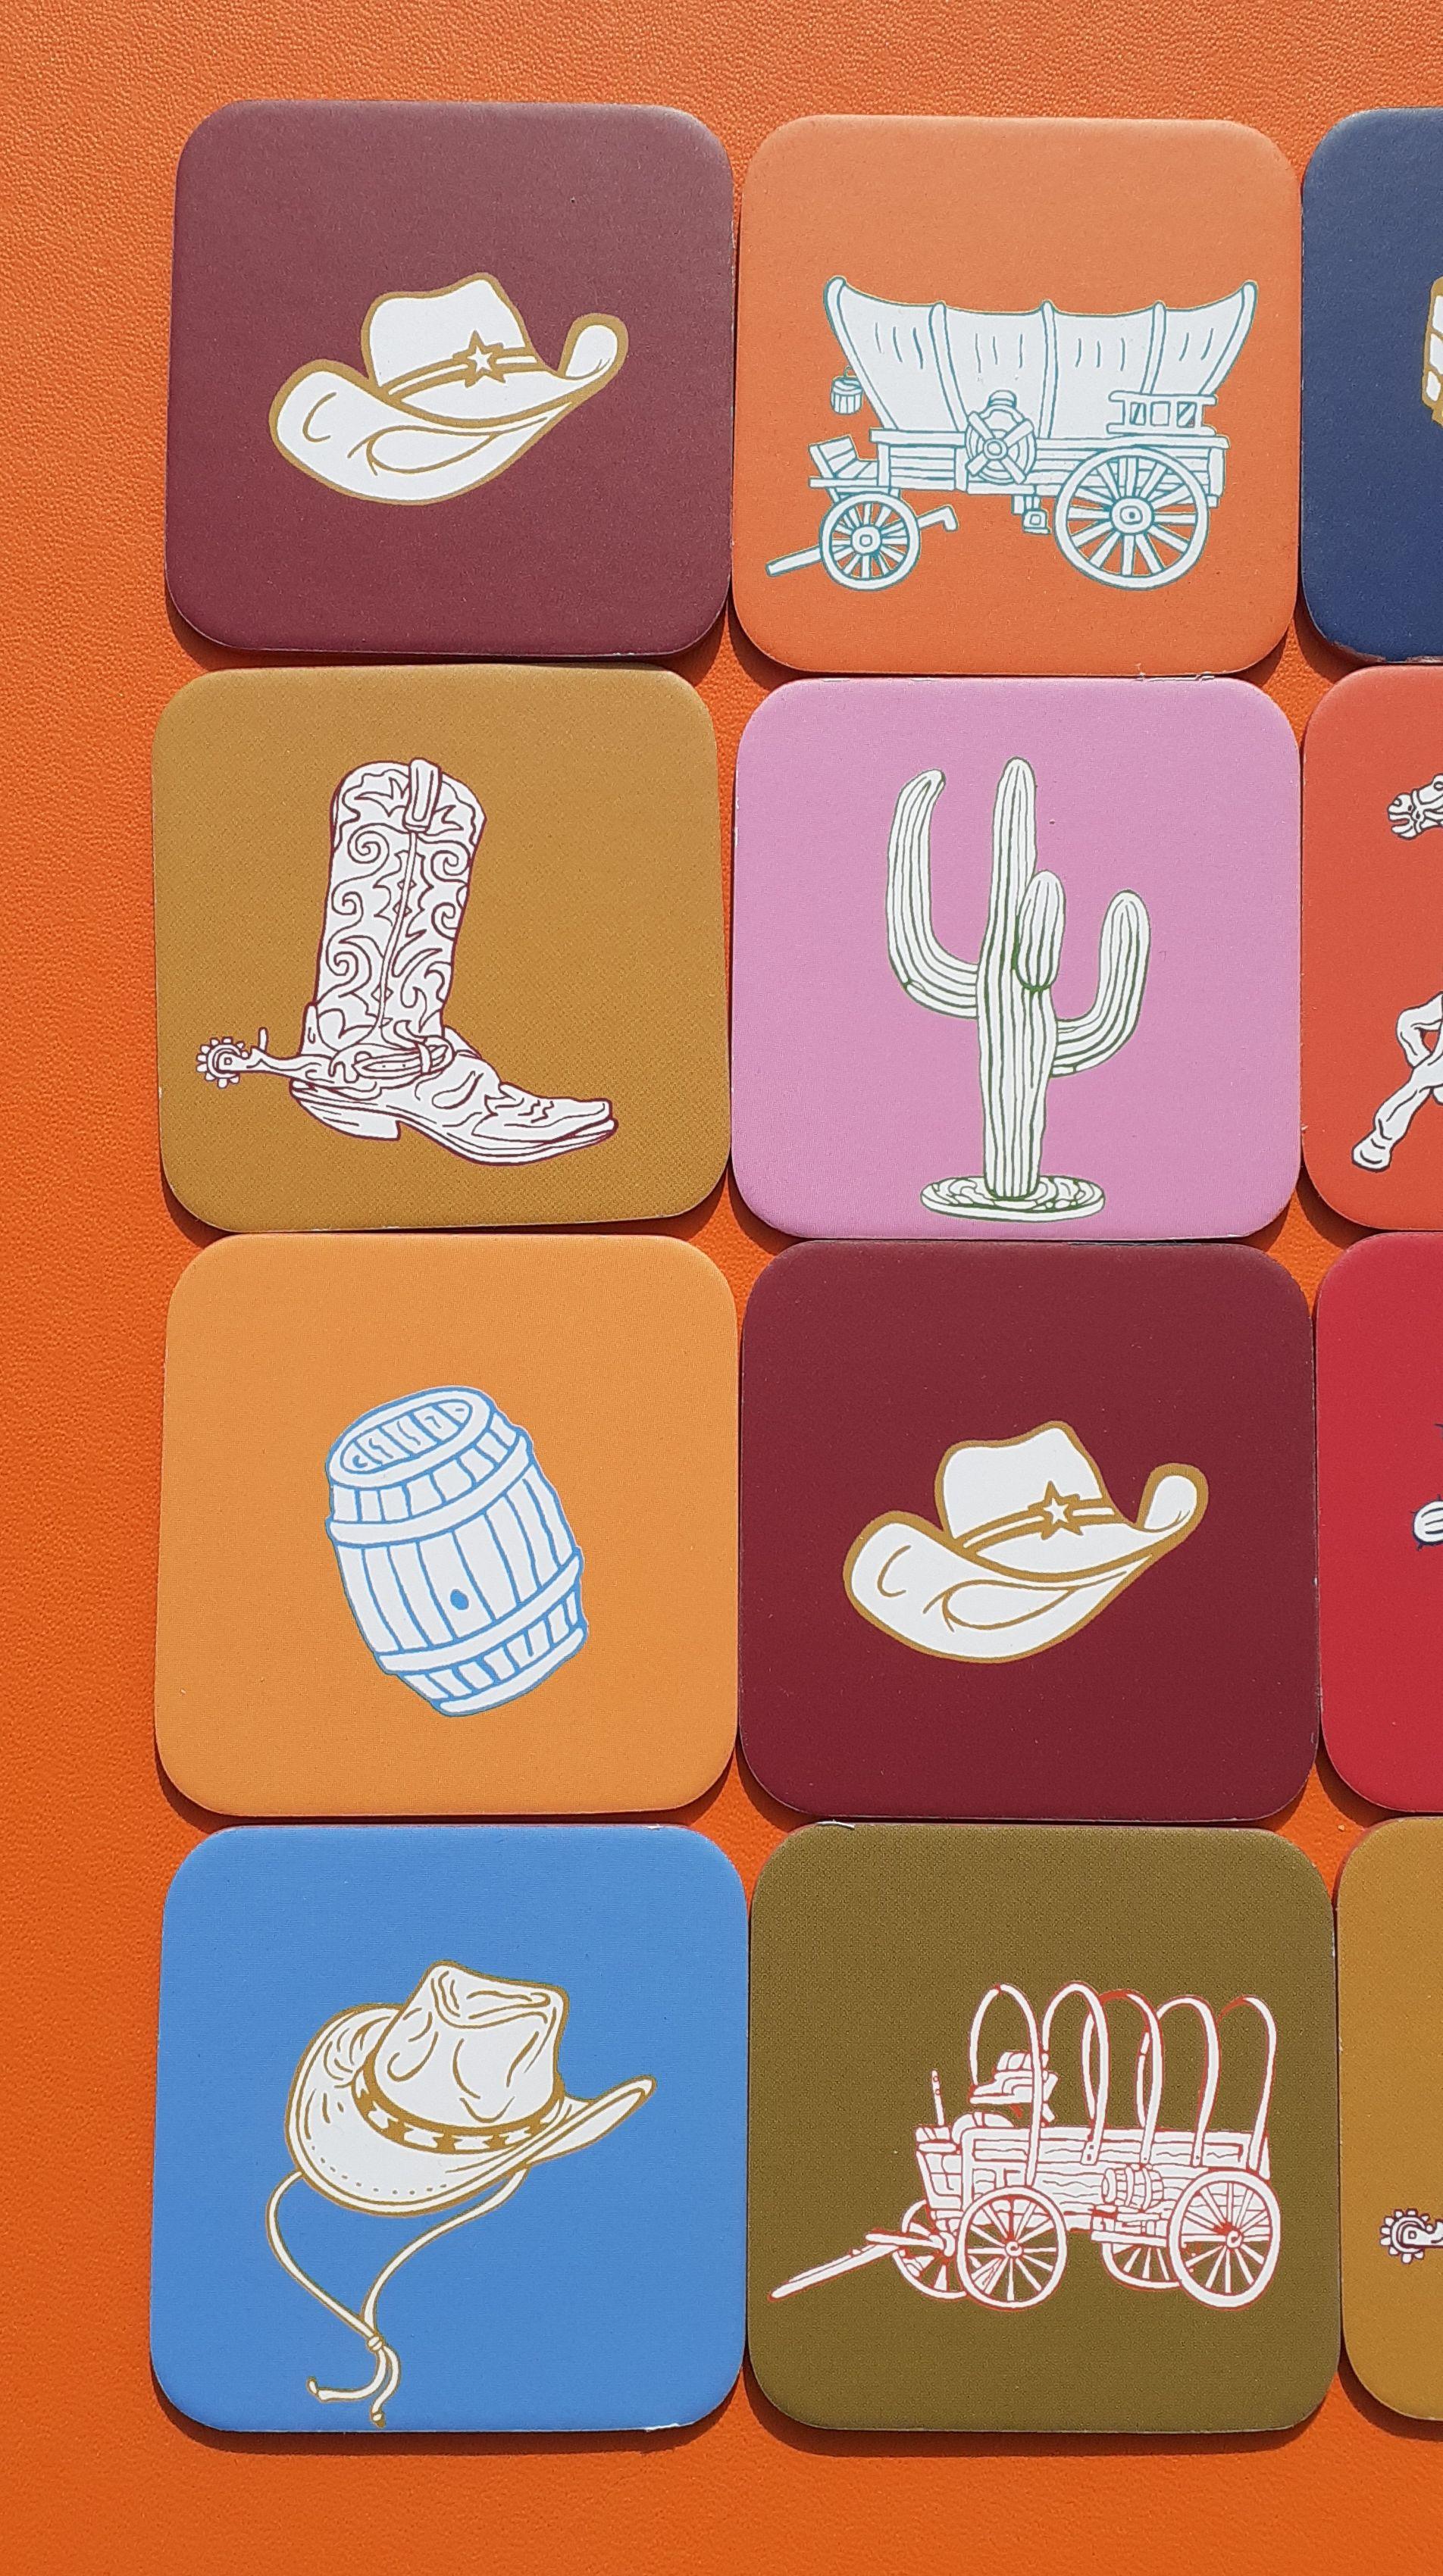 Beautiful Authentic Hermès Memory Game

Print: Texan spirit, Horse Riding theme, Western, Rodeo

Includes 12 pairs of cards, for a total of 24 cards

The same drawing is found on 2 cards, the objective being to find the pairs

Made of thick